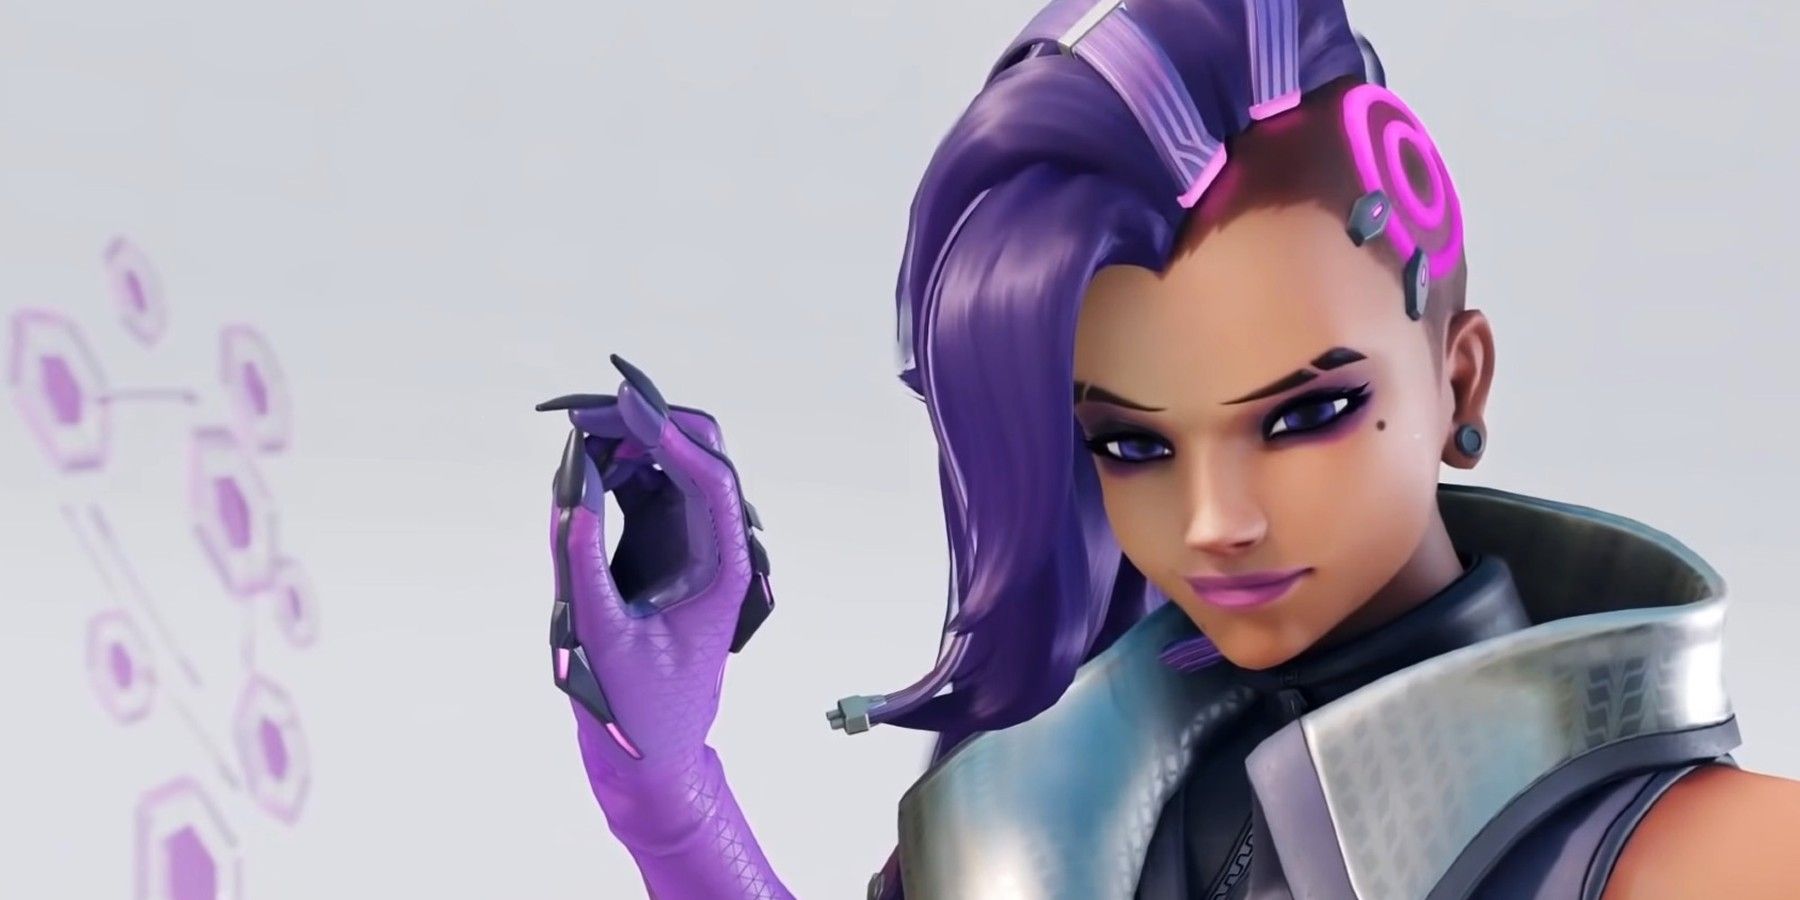 Funny Overwatch 2 Stat Screen Bug Shows How ‘OP’ Sombra Is